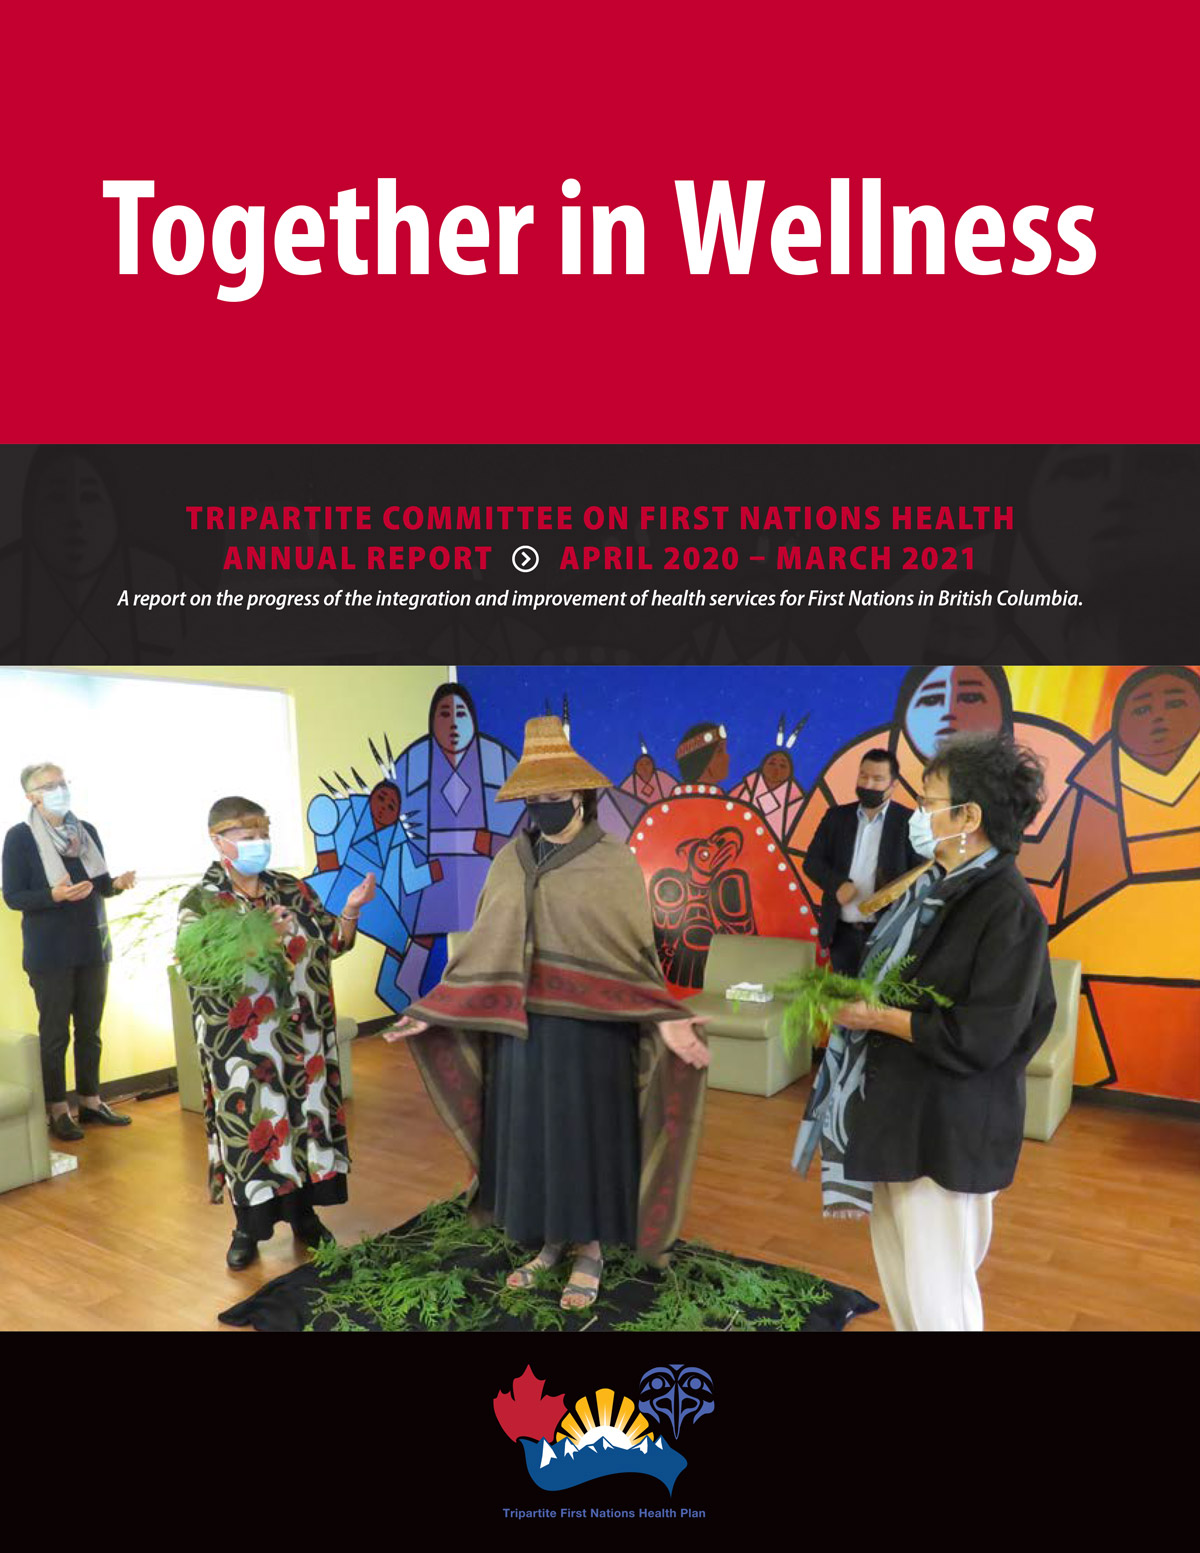 Together-in-Wellness-April-2020-March-2021-Cover.jpg